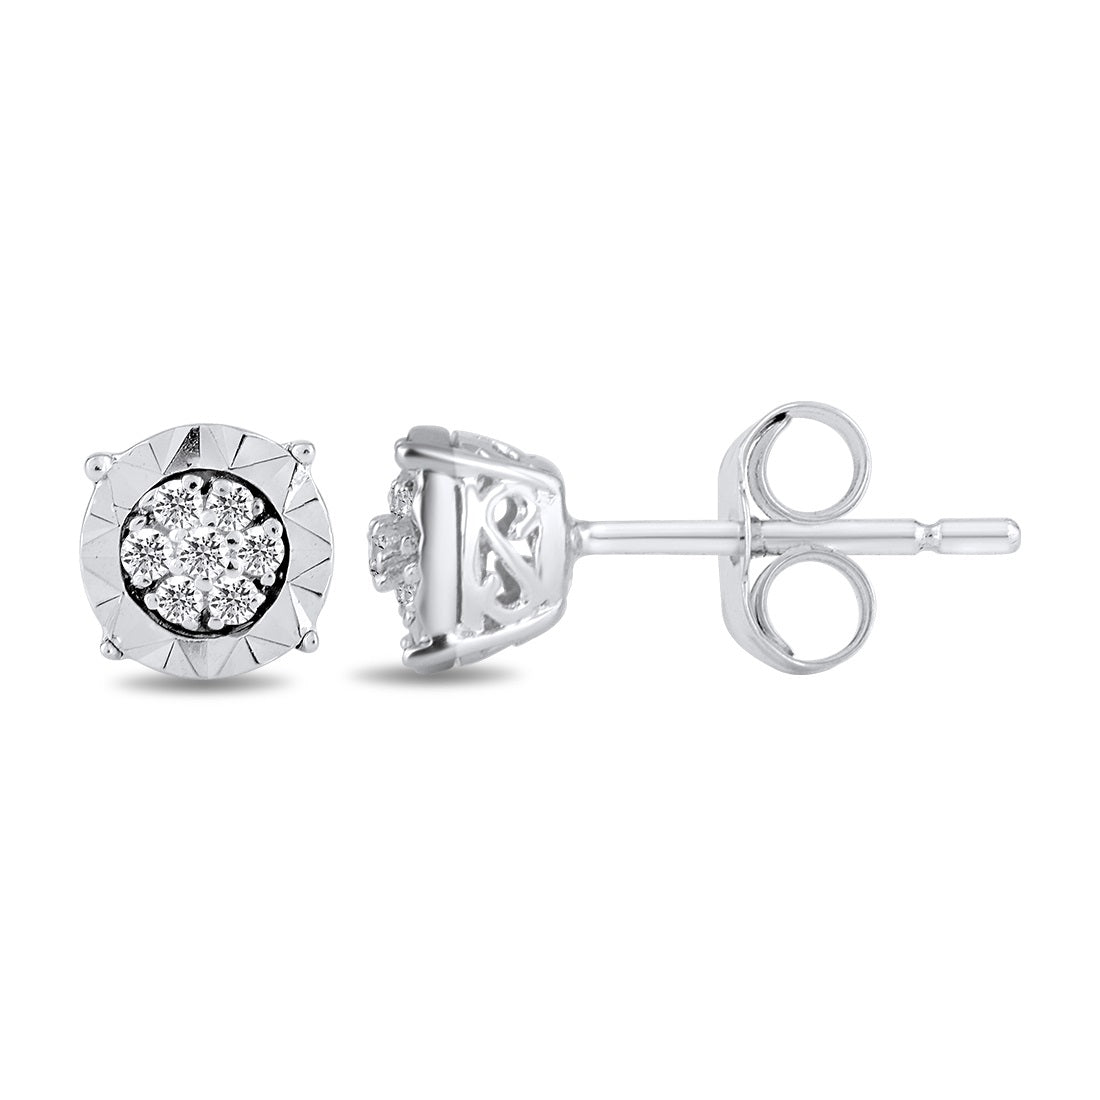 Tia Miracle Composite Diamond Earrings in 9ct White Gold Earrings Bevilles 